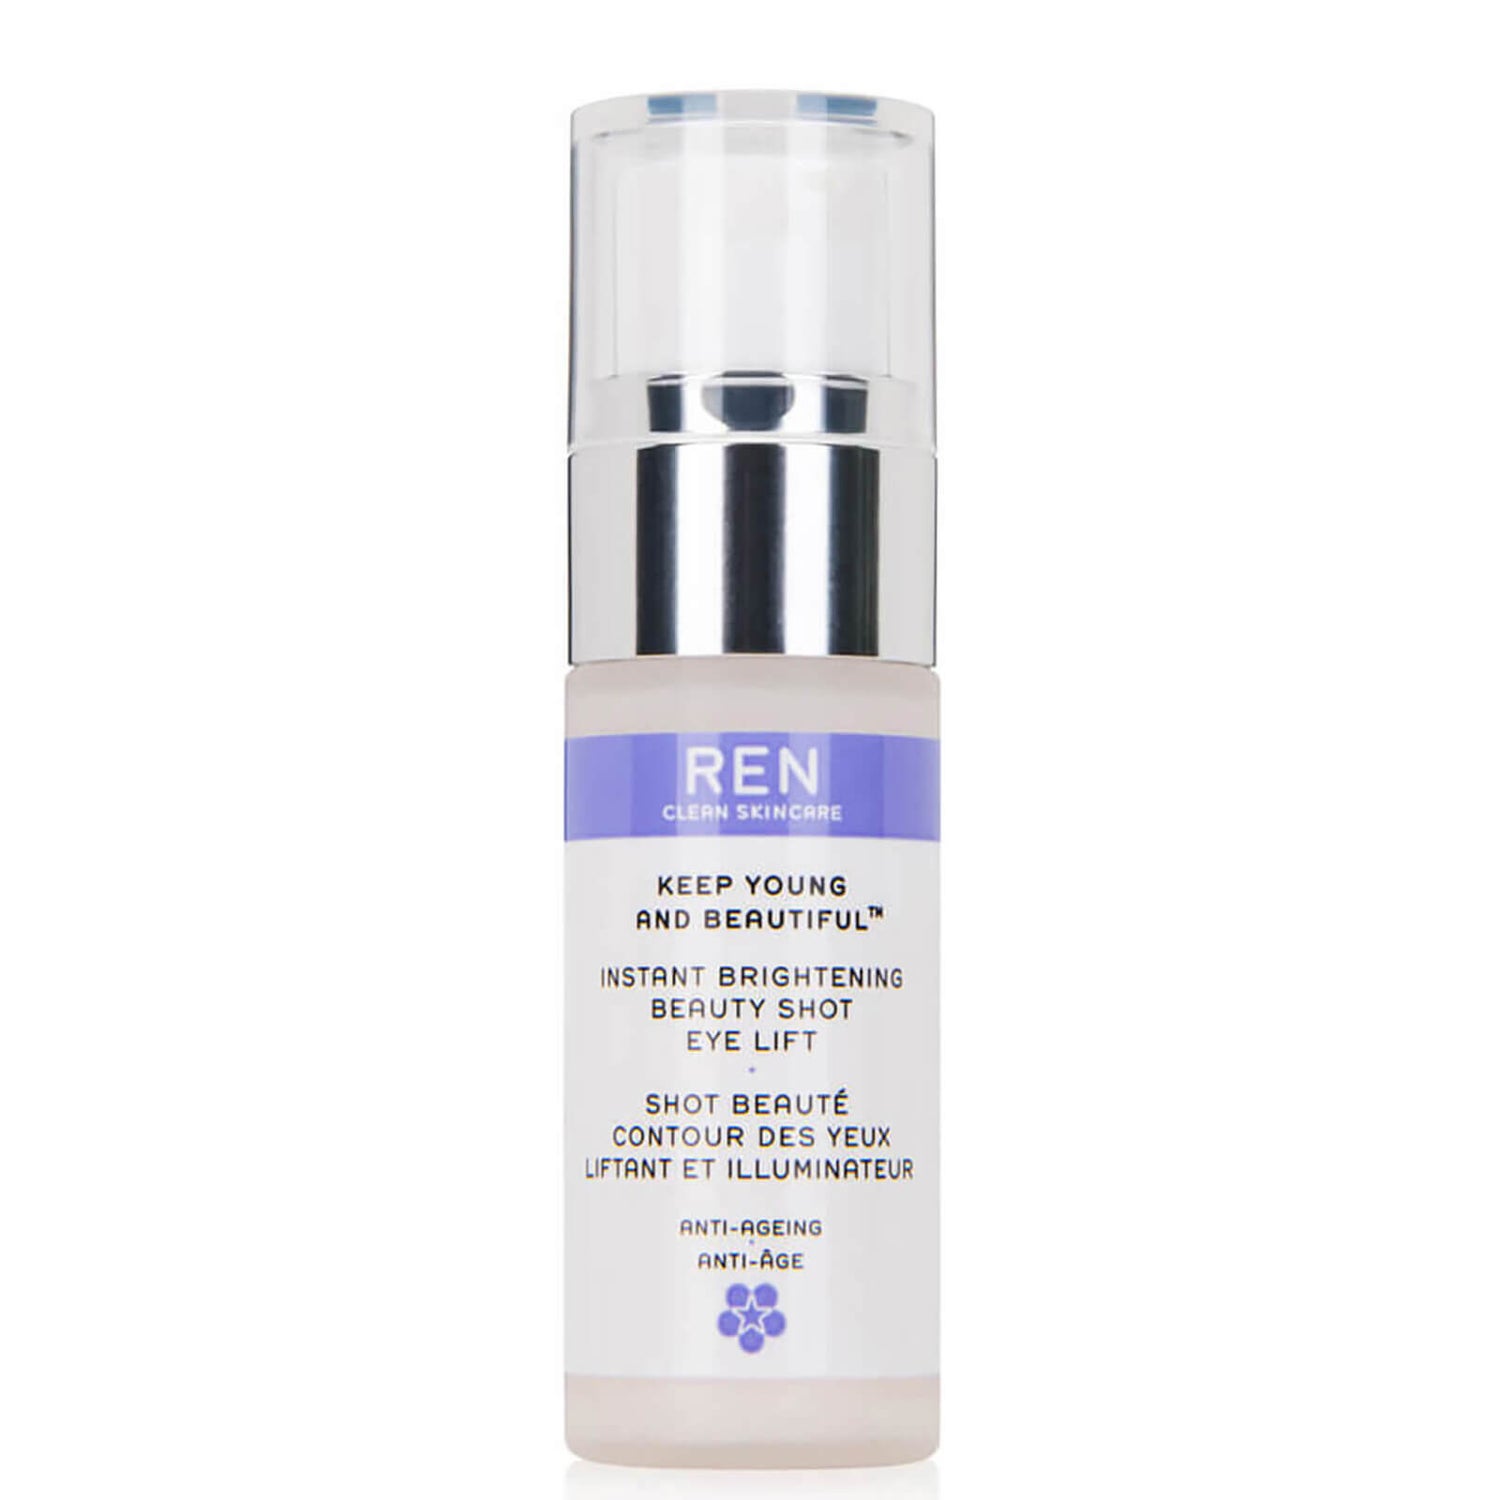 REN Clean Skincare Keep Young And Beautiful Instant Brightening Beauty Shot Eye Lift (0.5 fl. oz.)